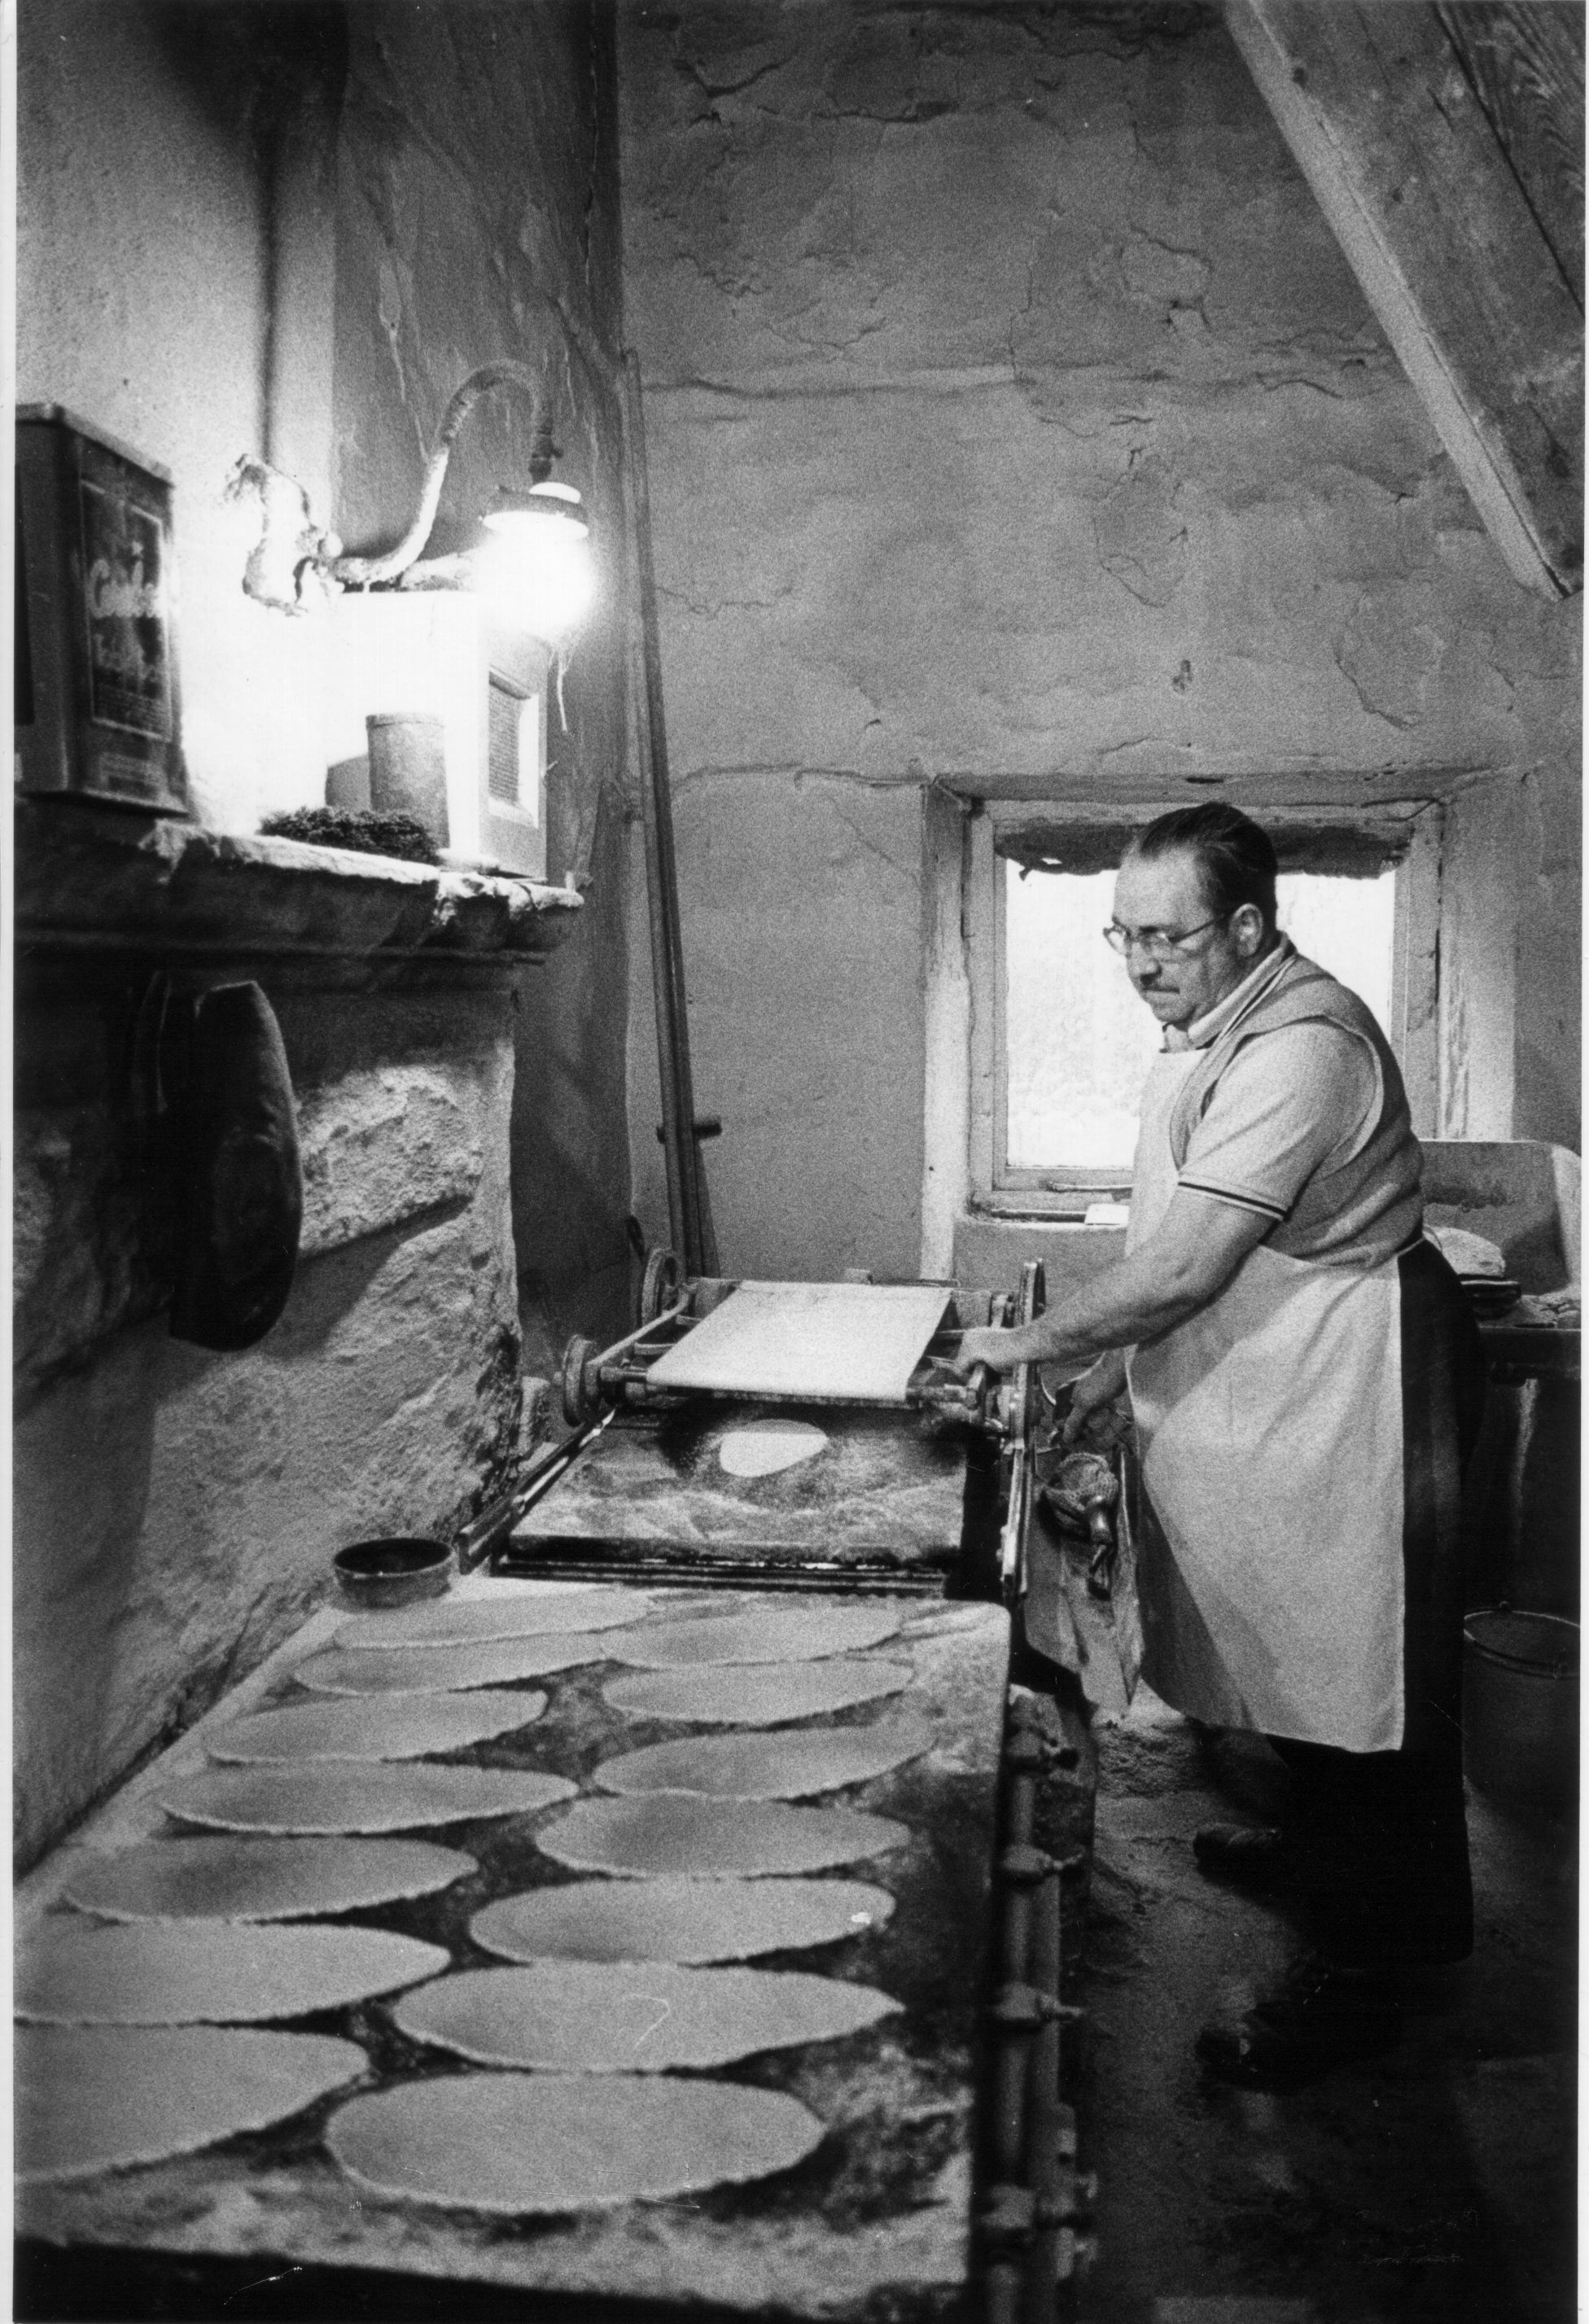 Alan making oatcakes early morning by gaslight, from the Family Archive